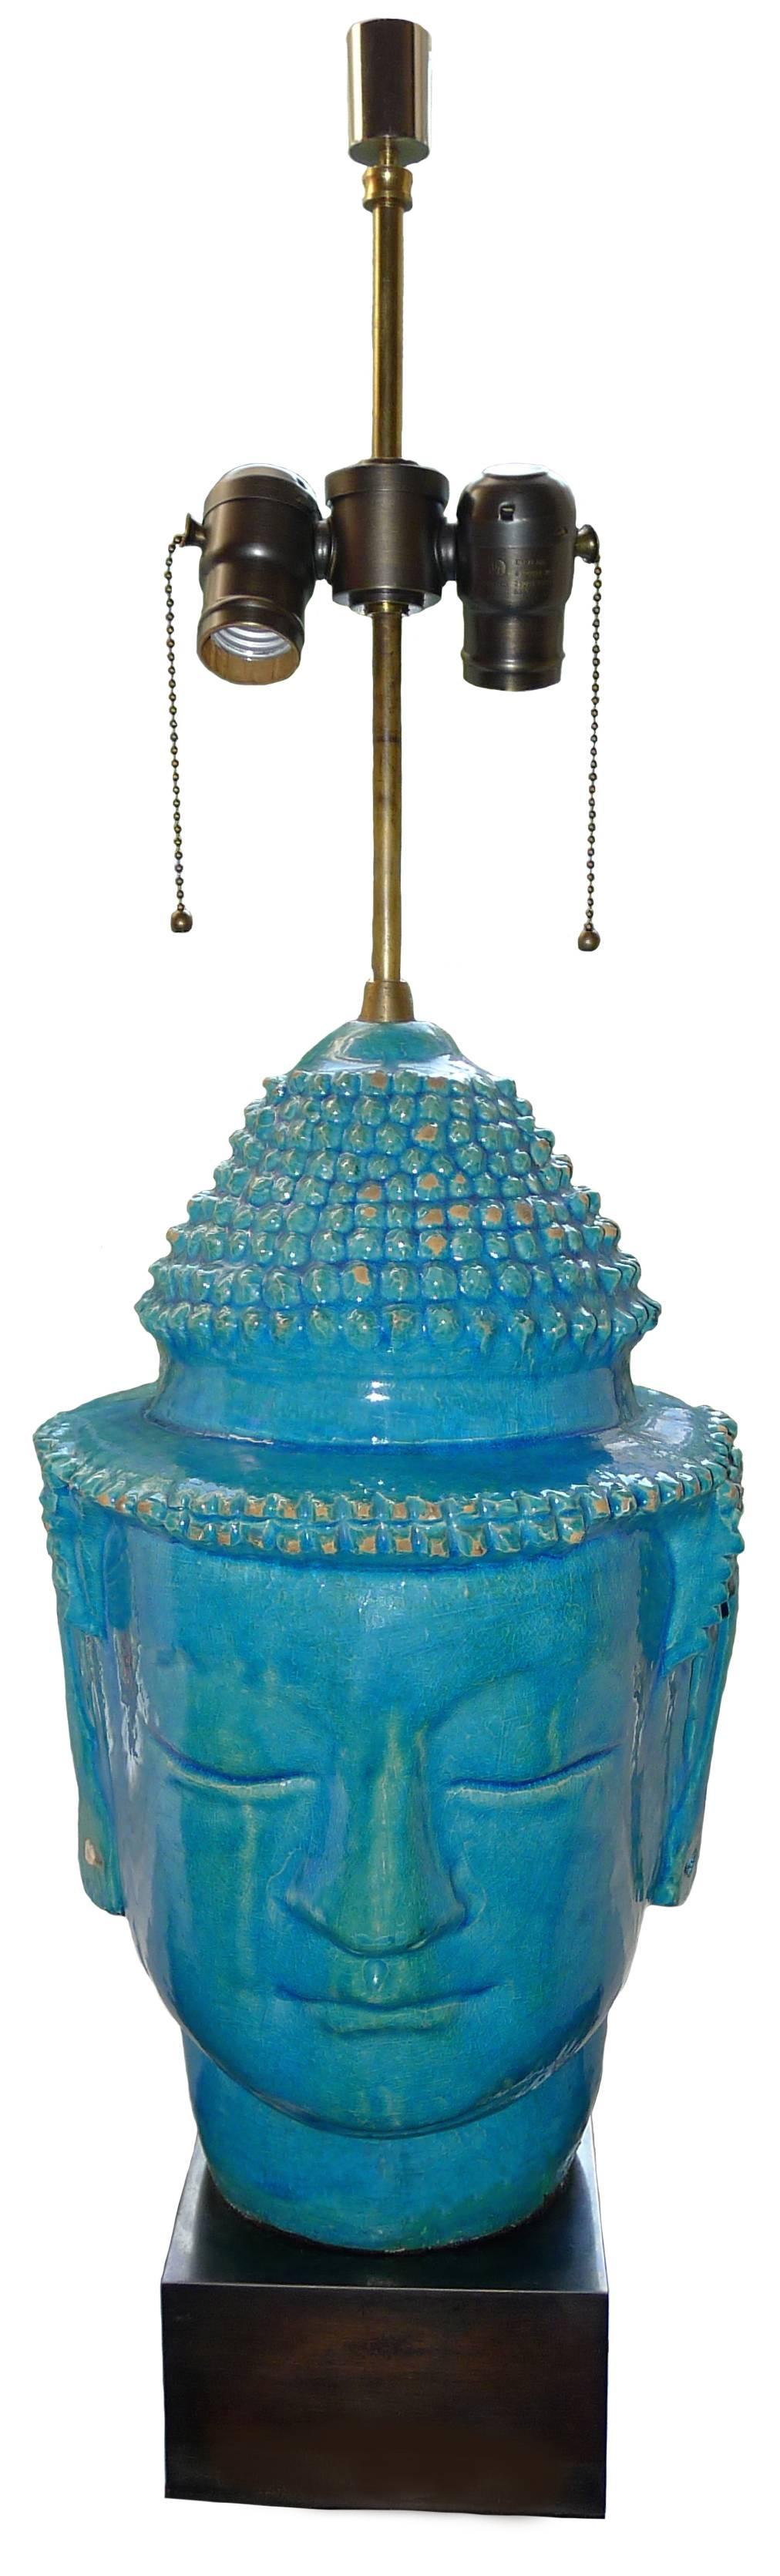 Large turquoise crackle-glazed terra cotta Buddha lamp. Newly refitted on a pewter metal base. Newly rewired. Takes two standard bulbs. Lampshade not included.